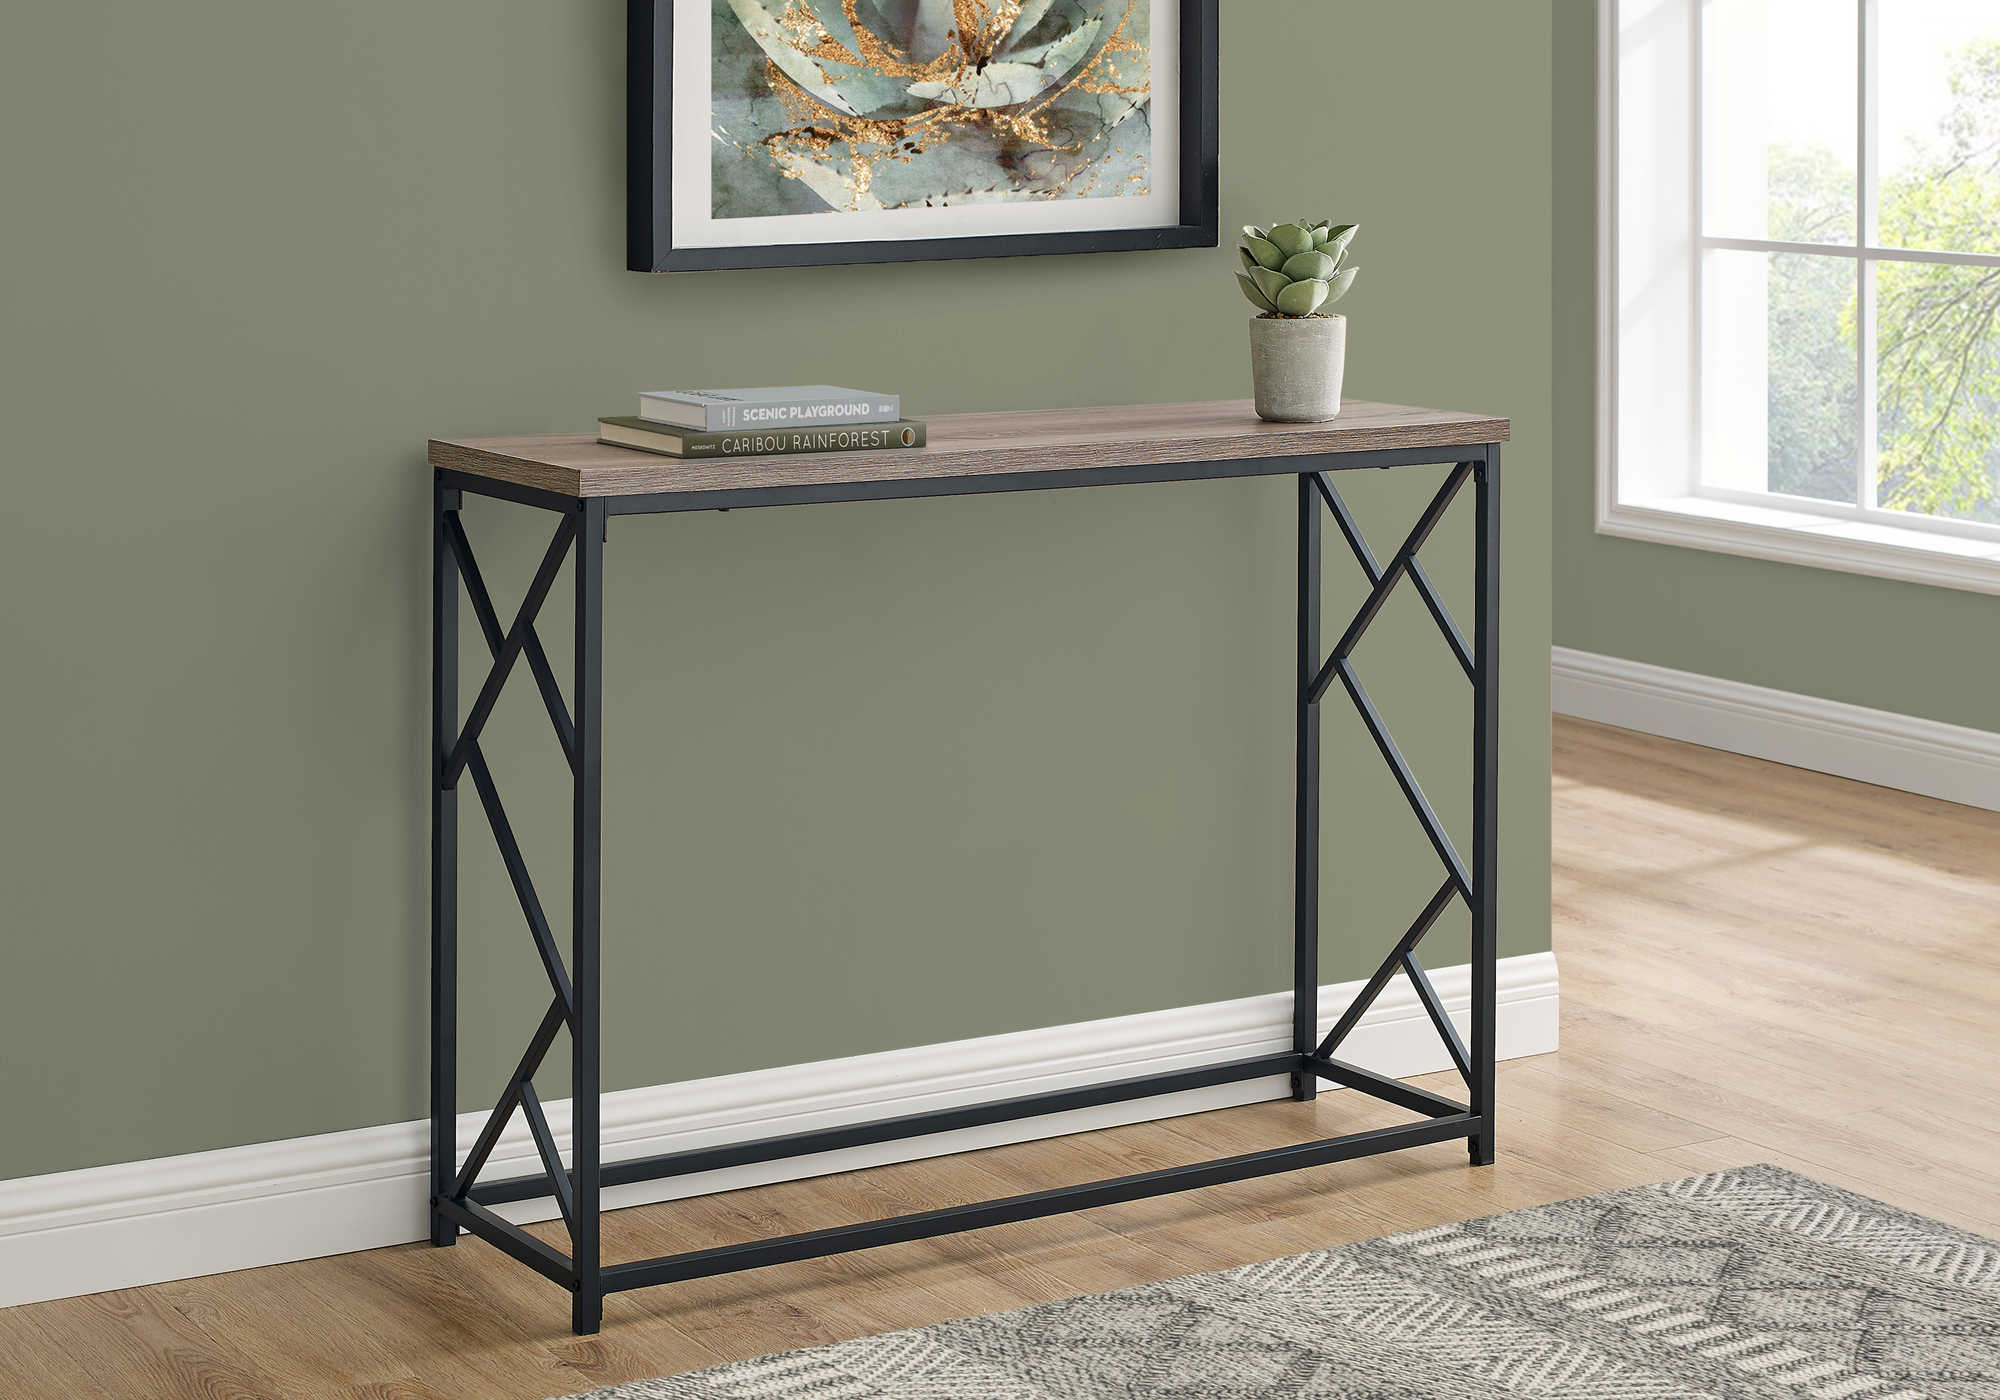 BEDROOM ACCENT CONSOLE TABLE - 44"L / TAUPE / BLACK METAL HALL CONSOLE